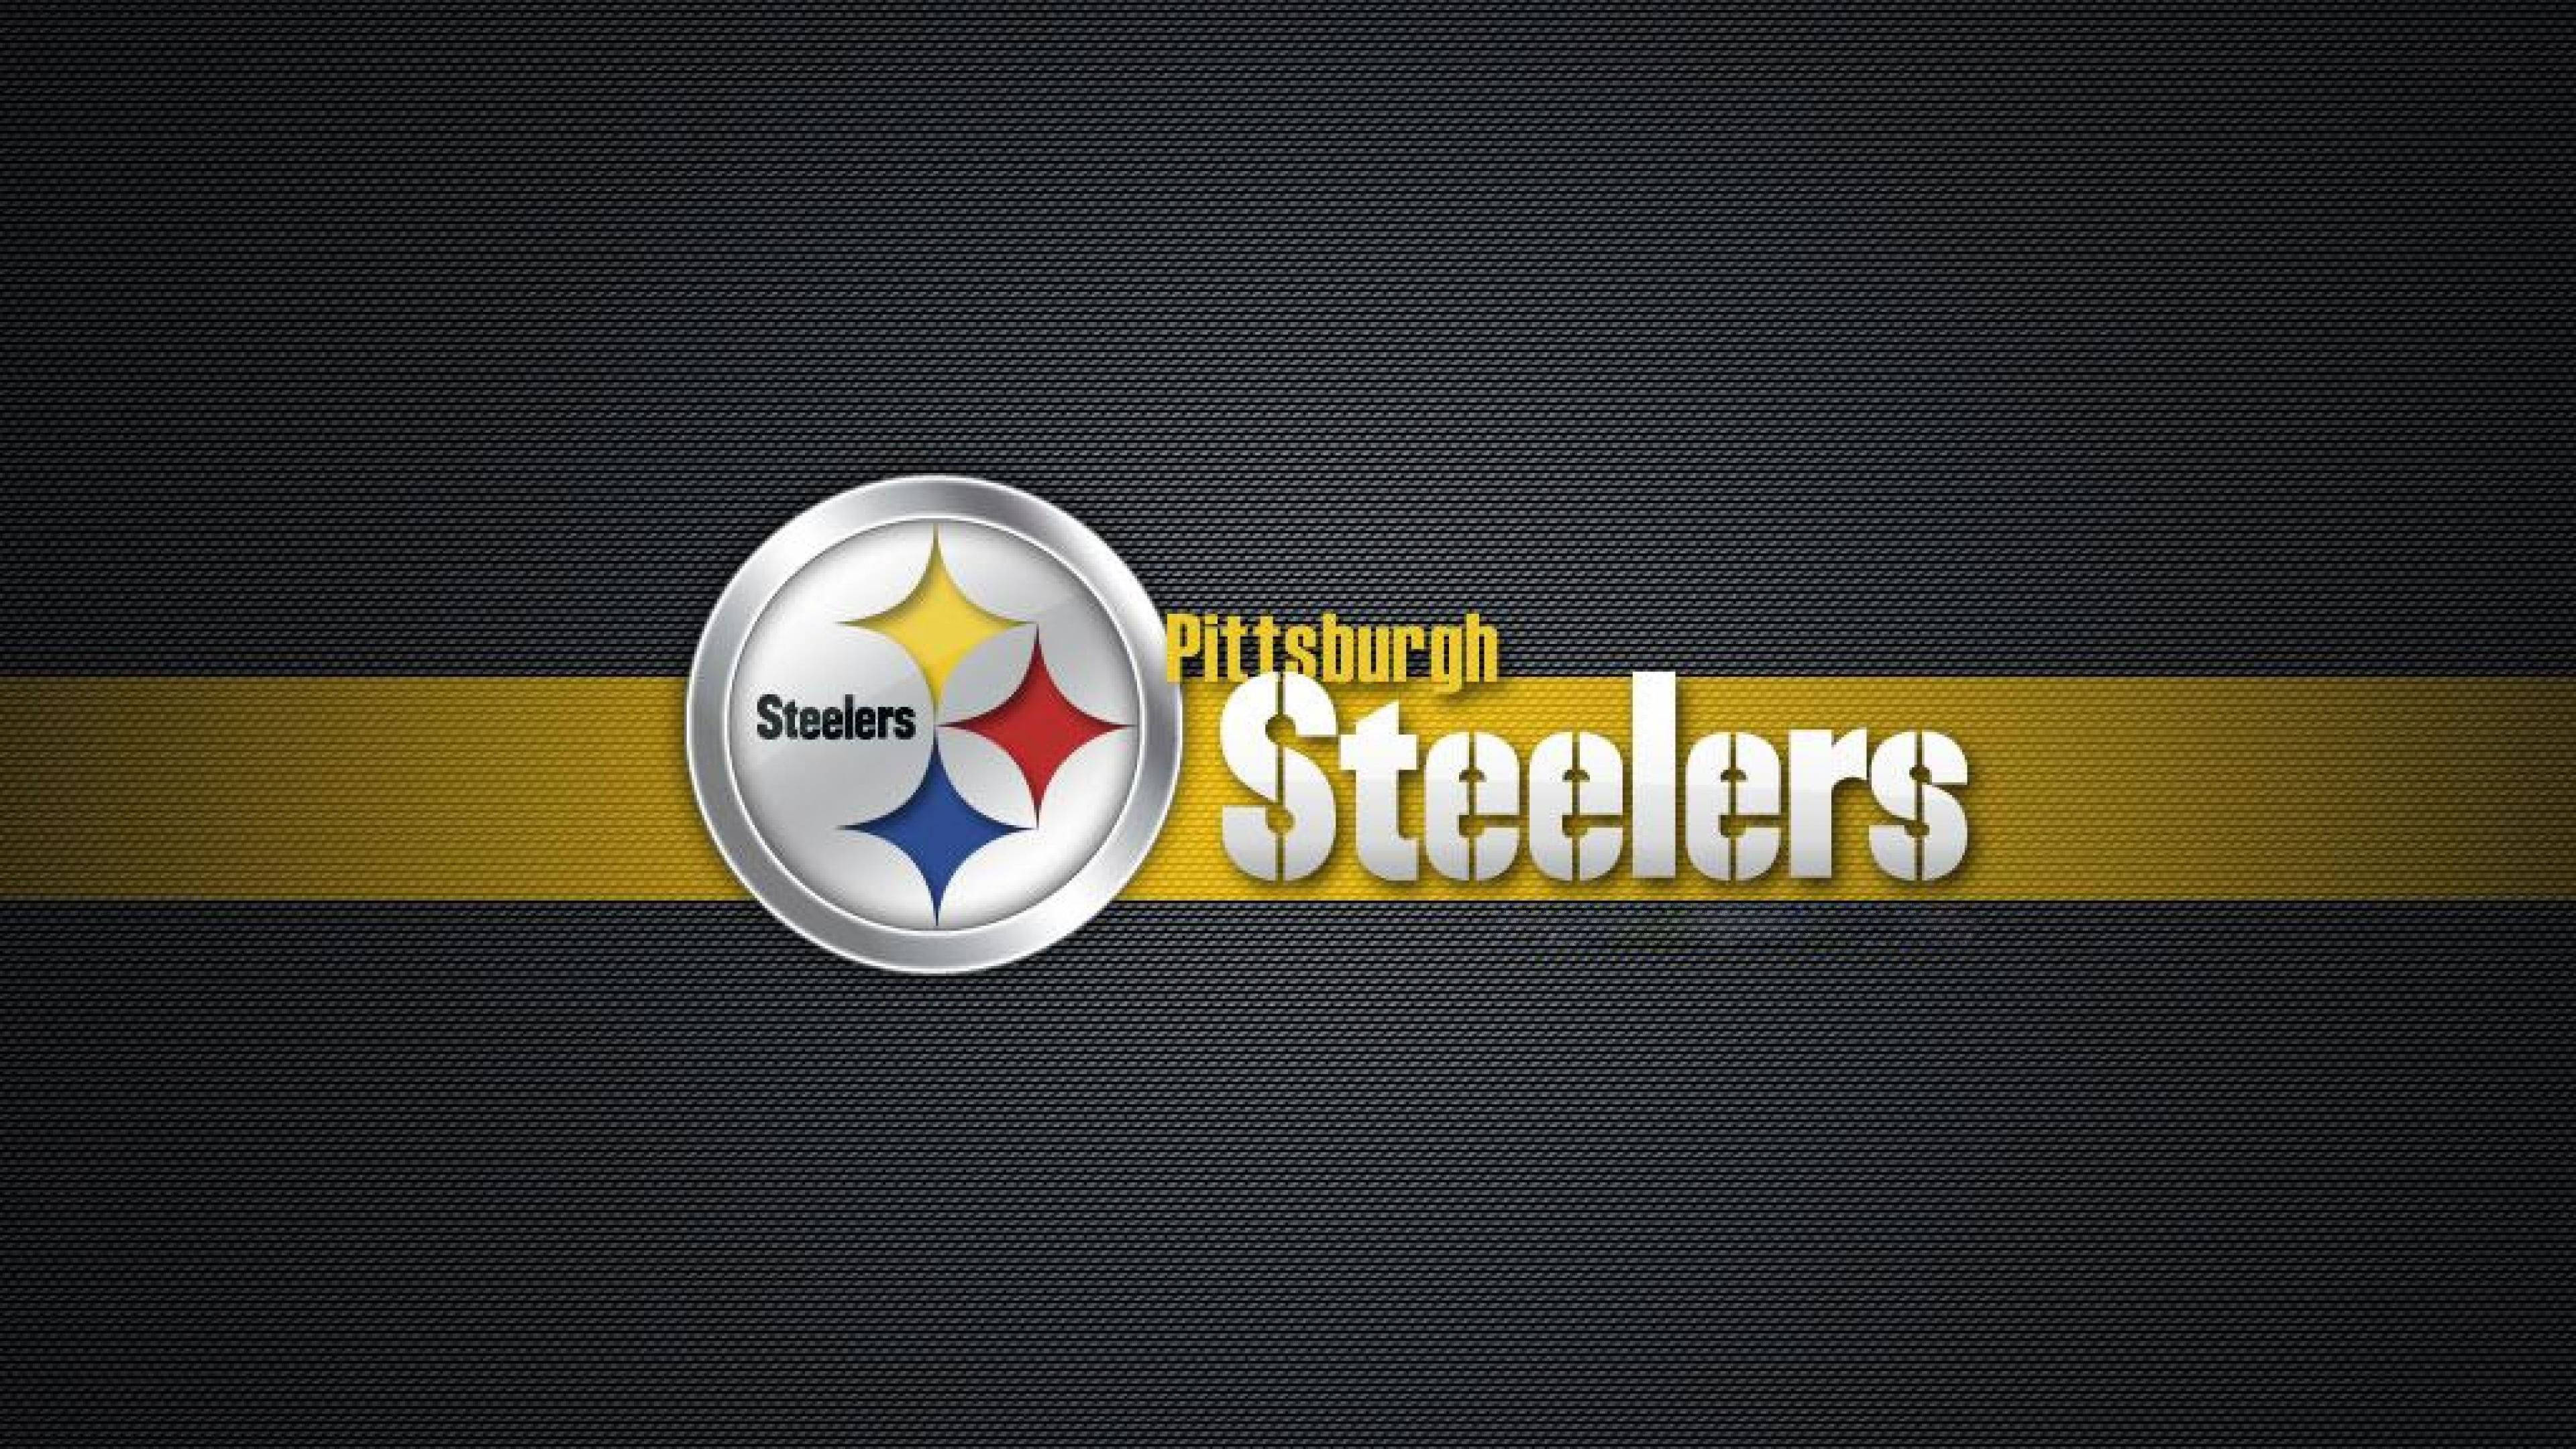 Pittsburgh Steelers Nfl Football Poster Background